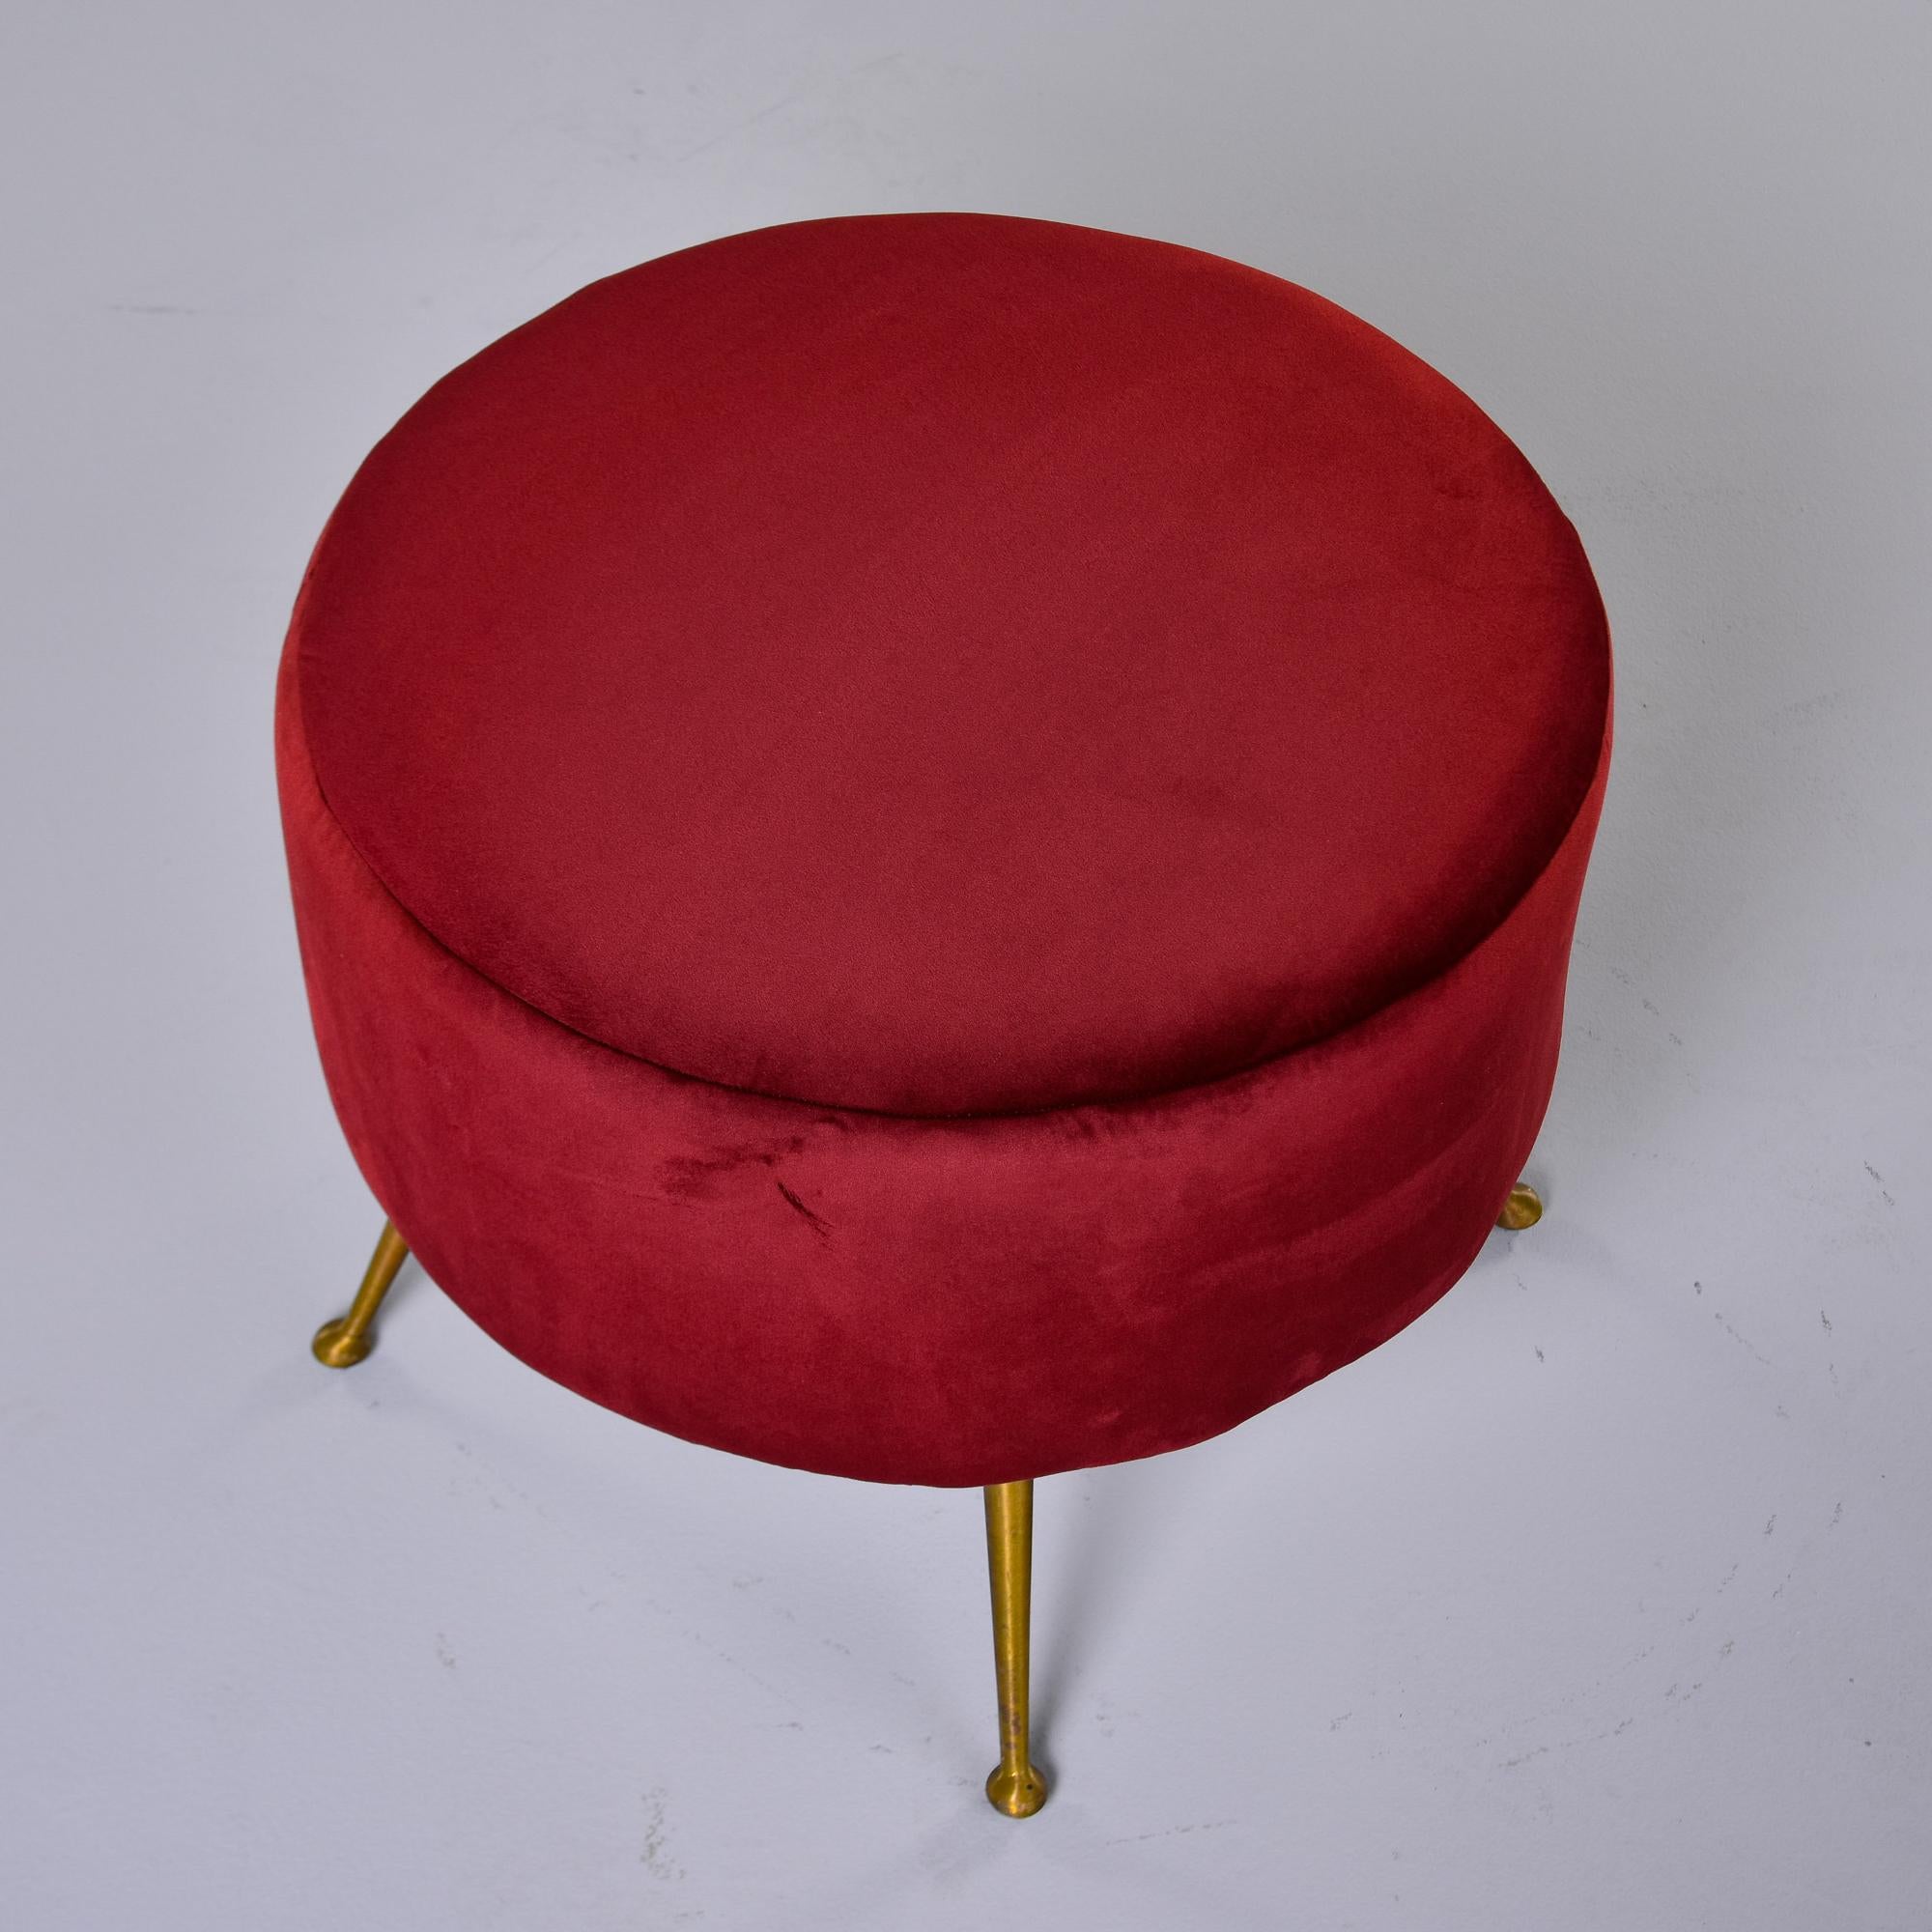 Italian Midcentury Round Stool with Red Upholstery and Brass Legs For Sale 3